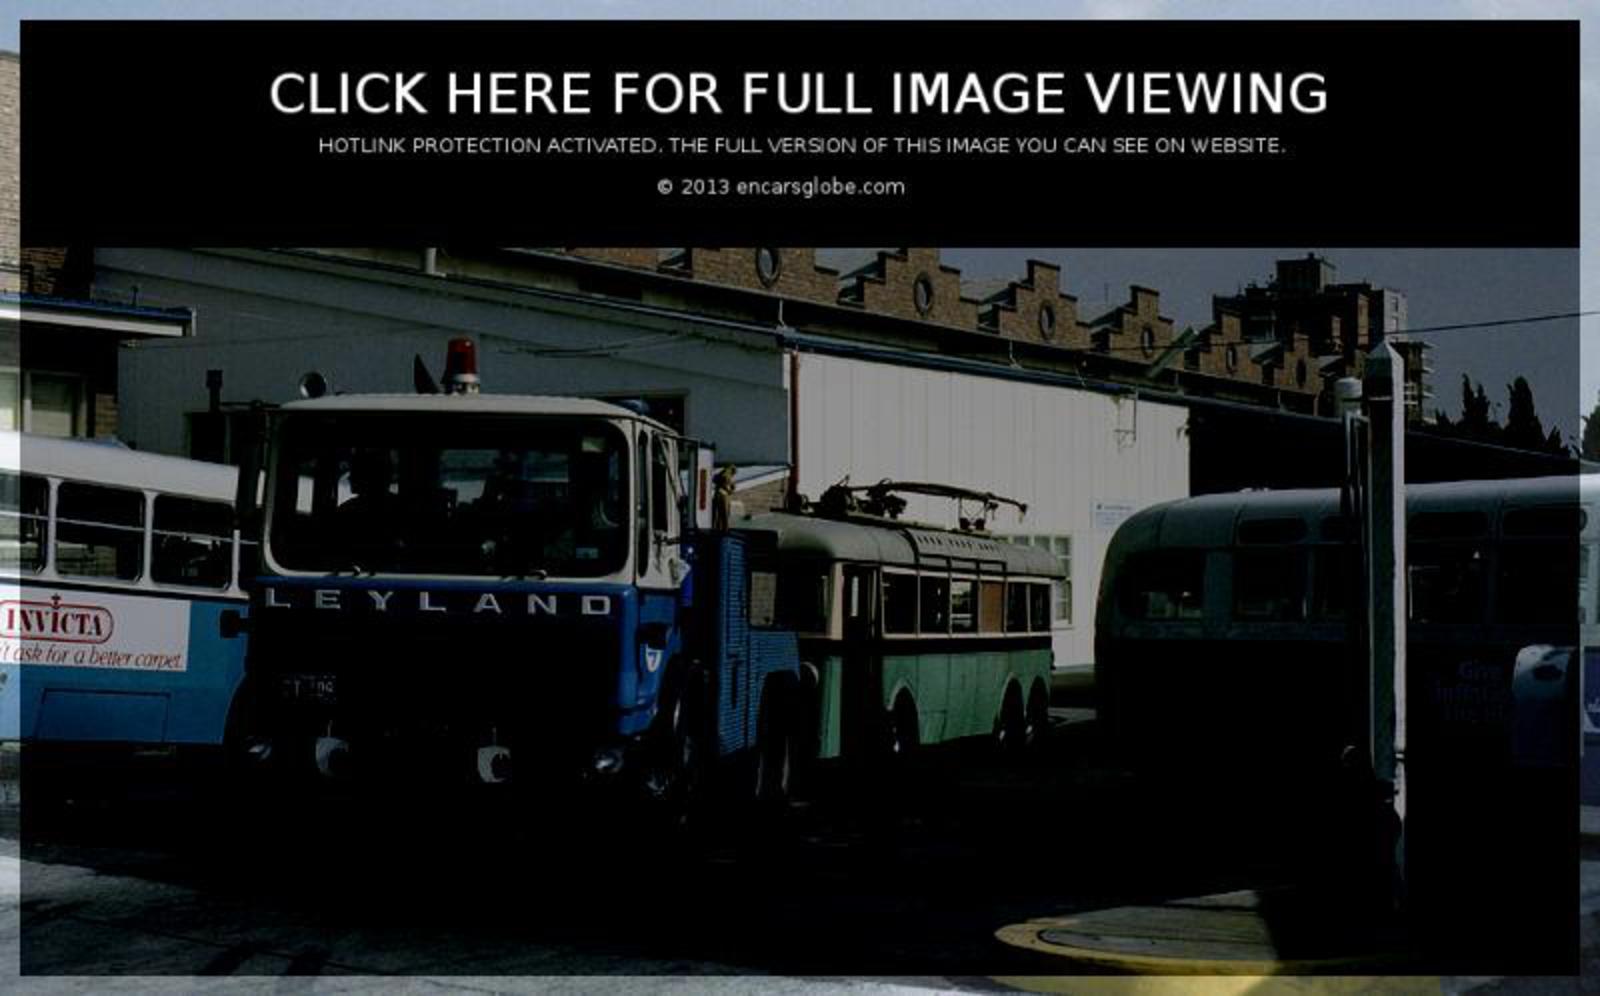 Leyland Trolley Bus Photo Gallery: Photo #06 out of 12, Image Size ...